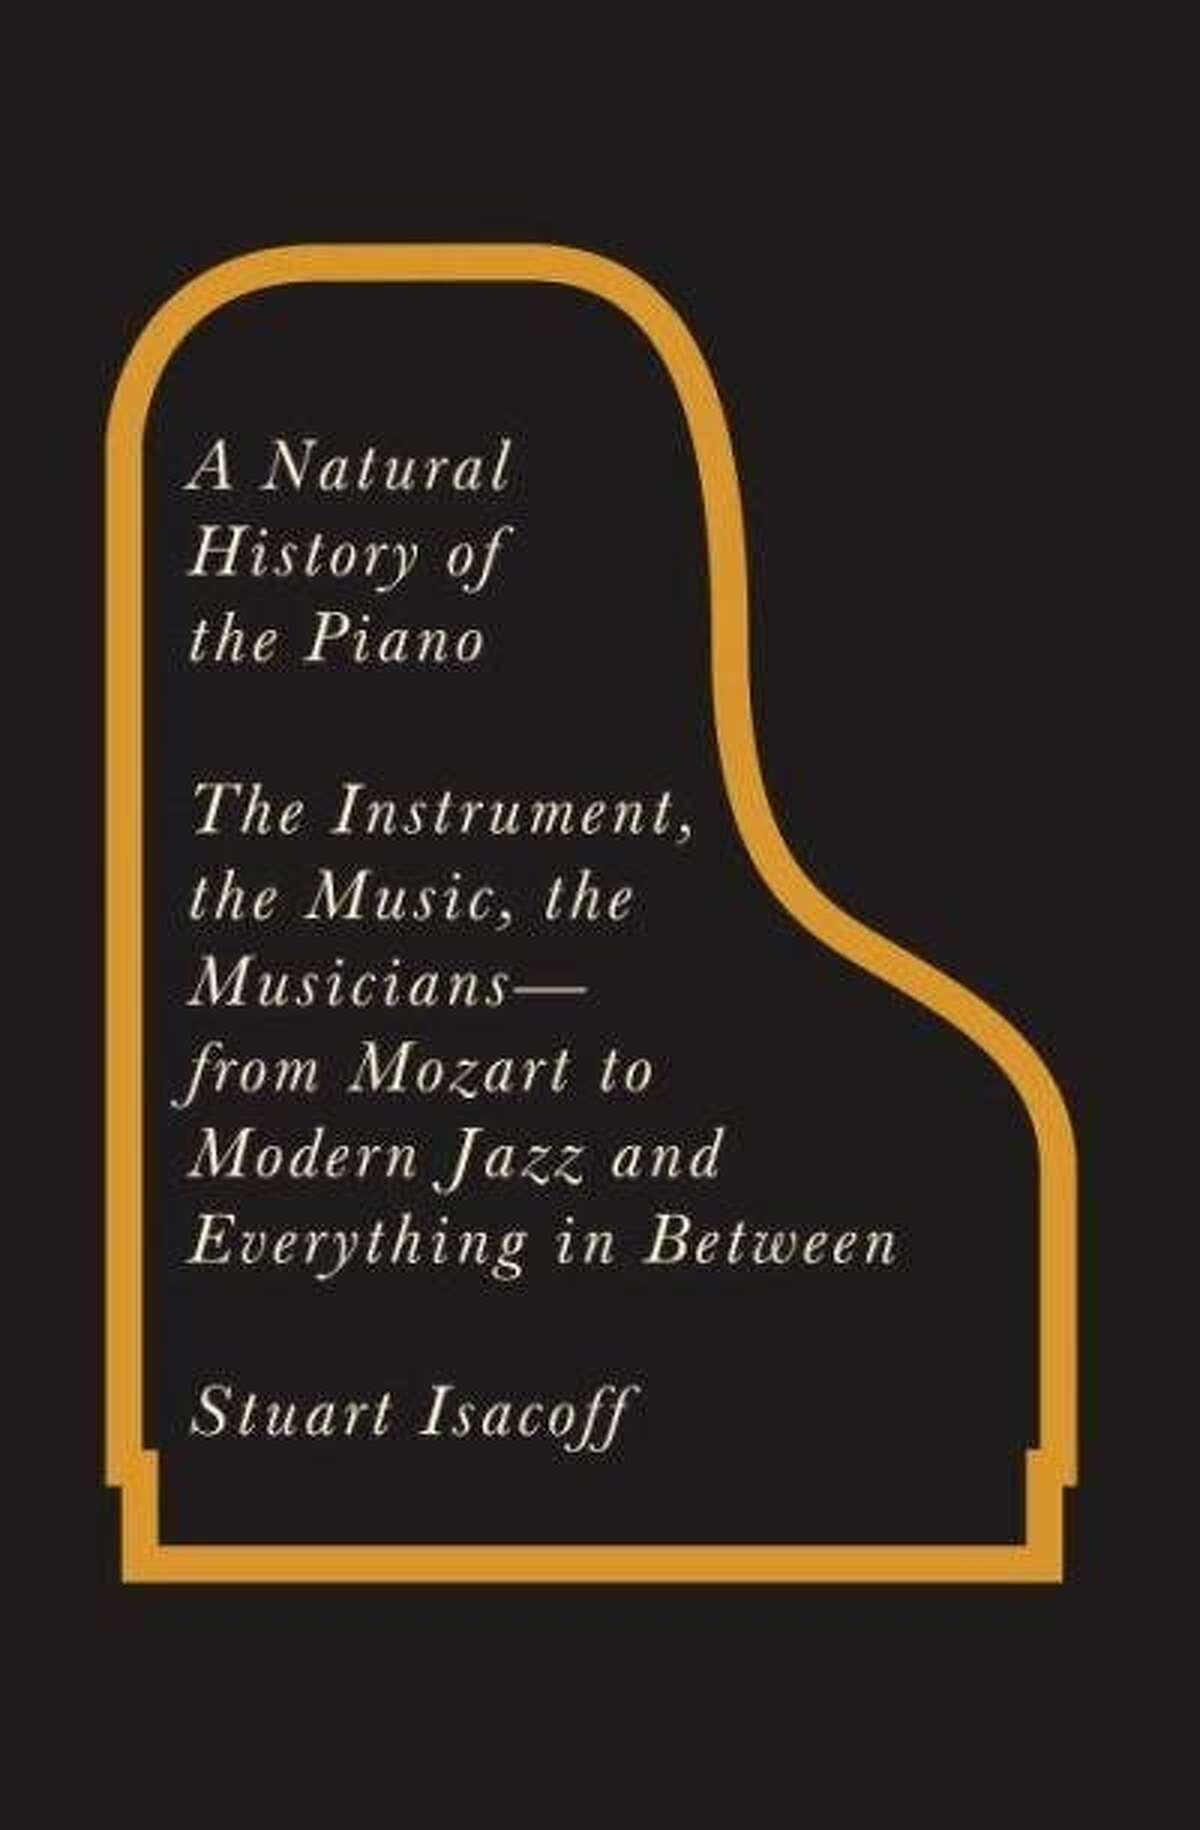 A Natural History of the Piano: The Instrument, the Music, the Musicians — From Mozart to Modern Jazz and Everything In Between" by Stuart Isacoff